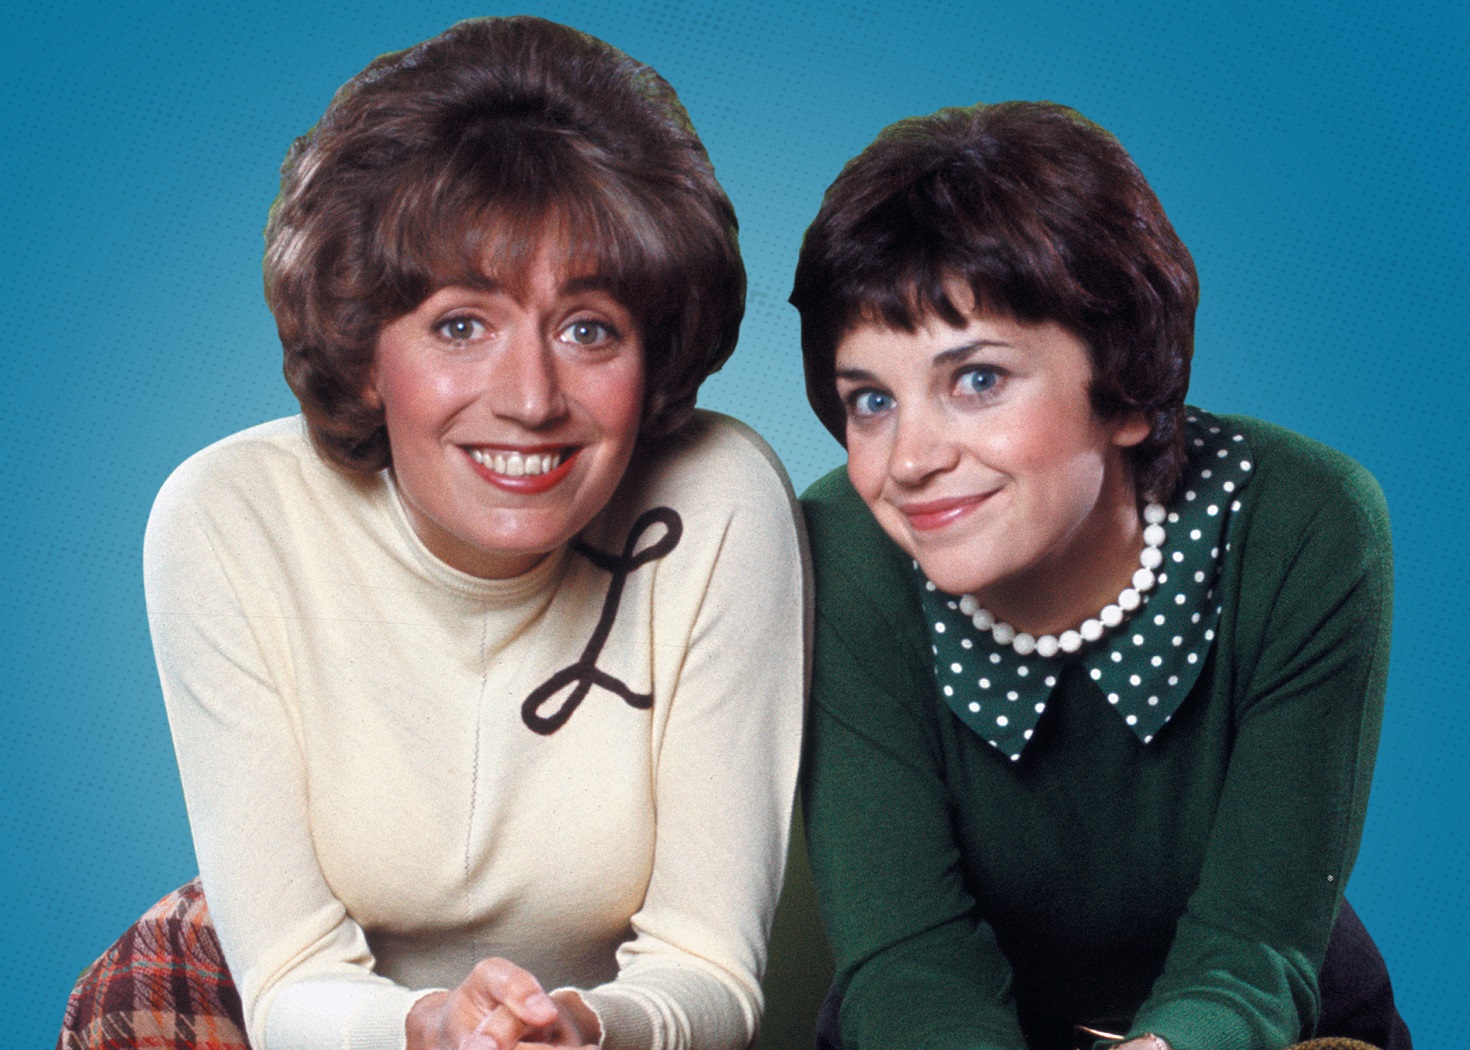 Metv laverne and shirly penny marshall cindy williams.